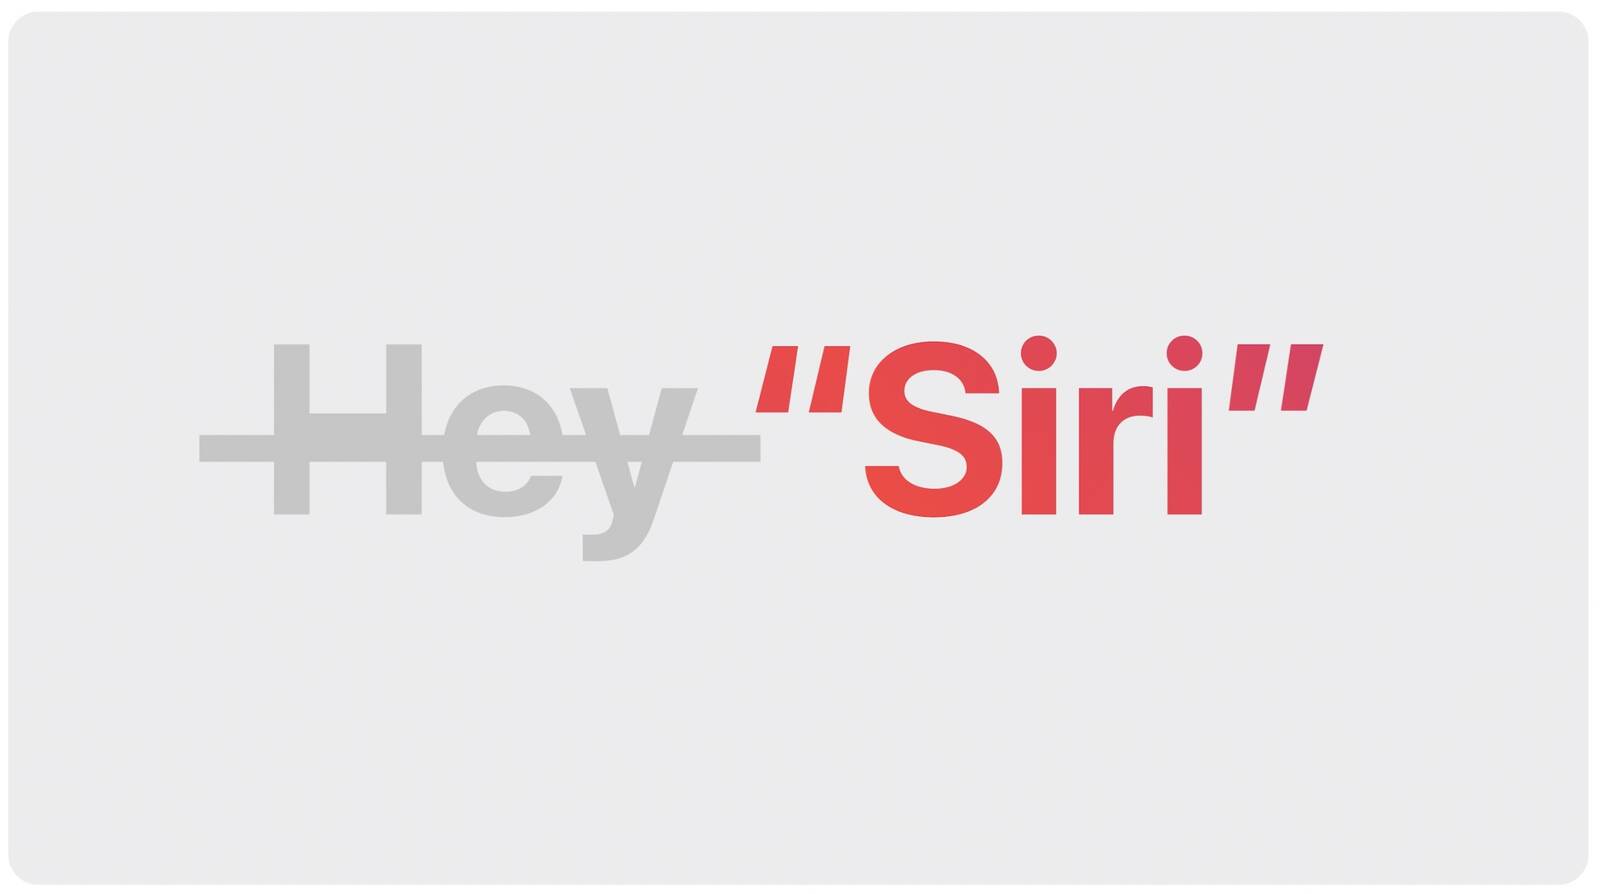 Apple Shortening ‘Hey Siri’ to ‘Siri’ Across iPhone, Mac, and Other Devices